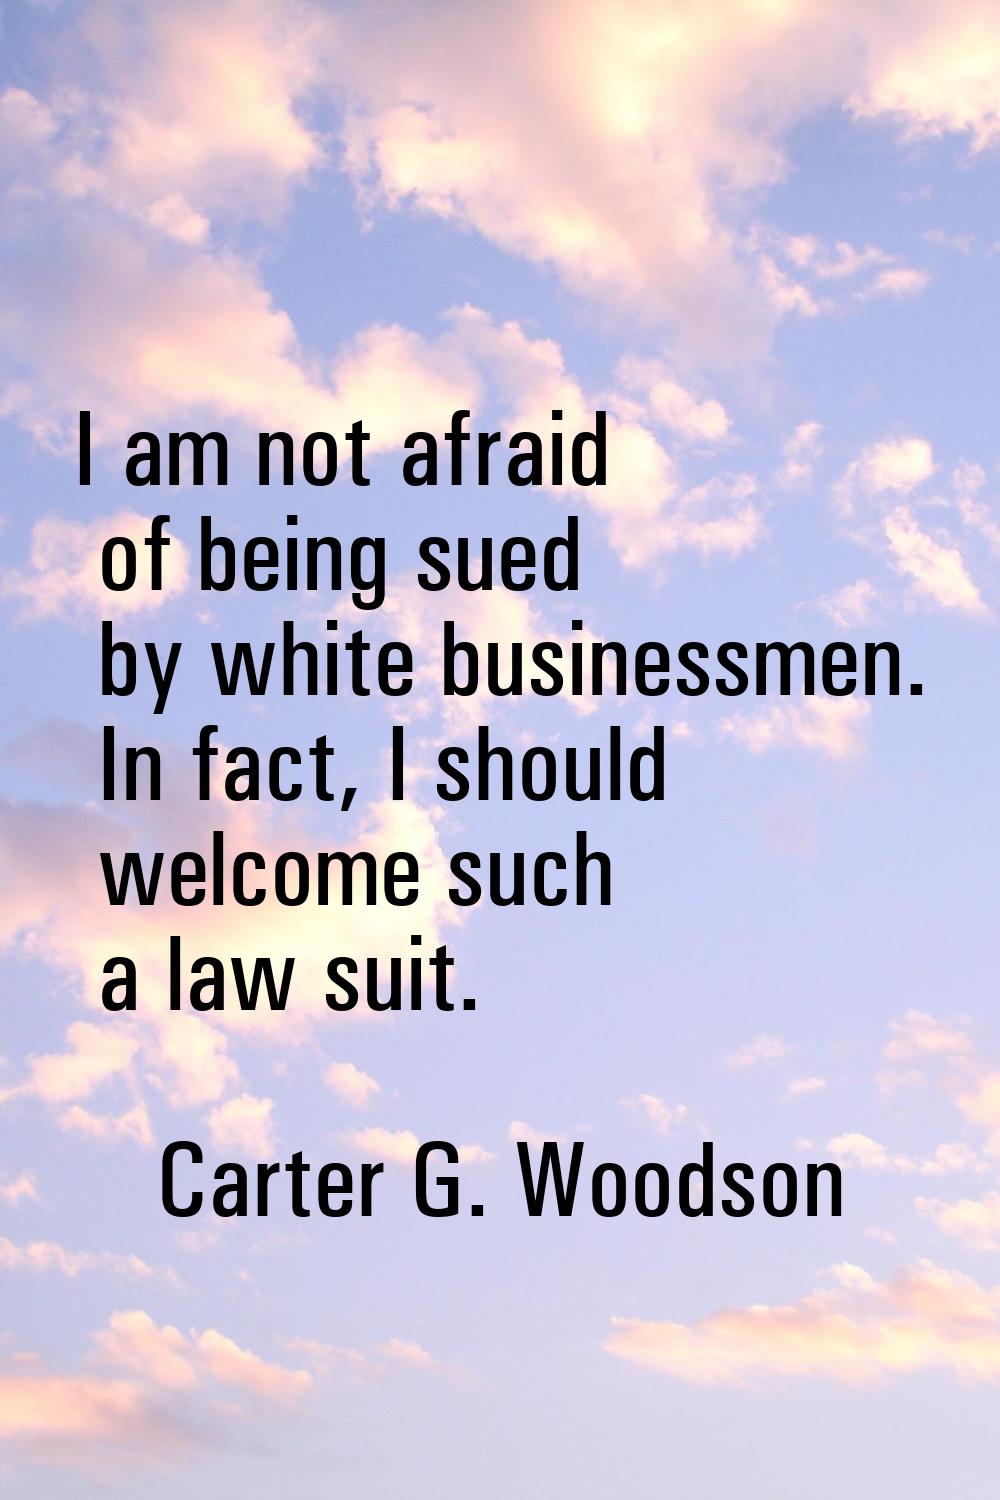 I am not afraid of being sued by white businessmen. In fact, I should welcome such a law suit.